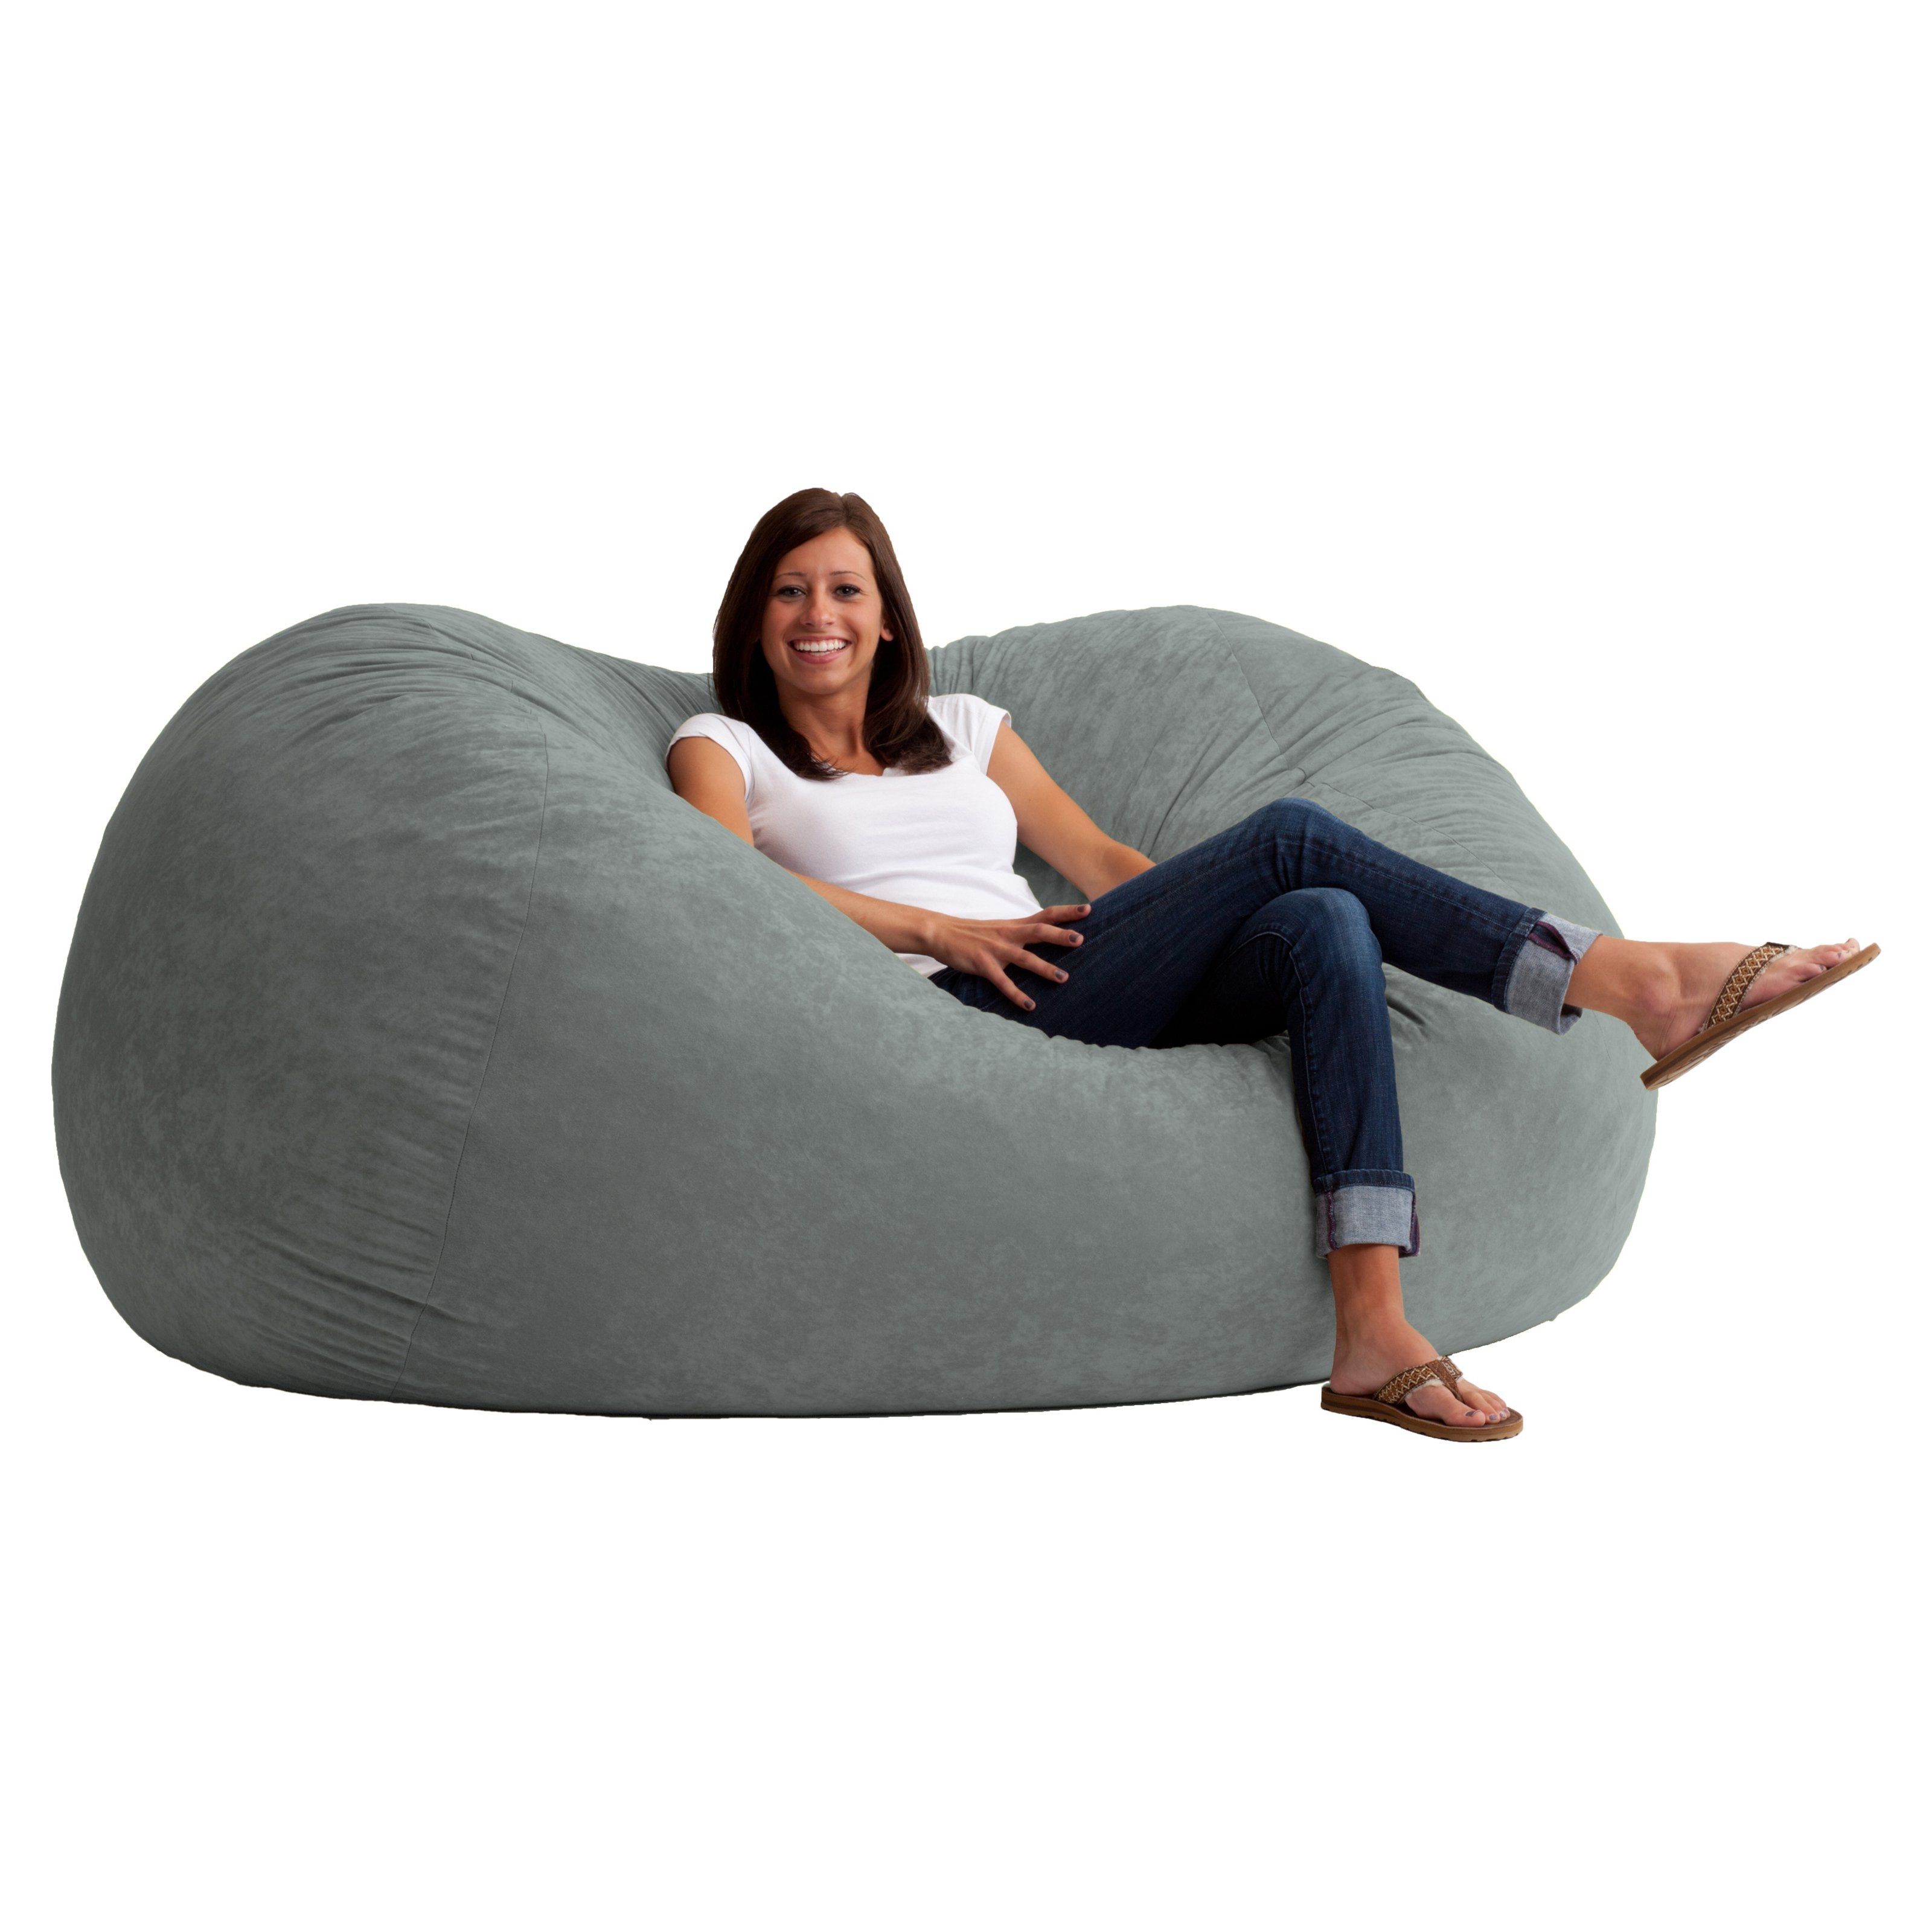 Fuf 7 Ft Xxl Comfort Suede Bean Bag Sofa Bean Bags At Hayneedle Throughout Bean Bag Sofas And Chairs (View 13 of 15)